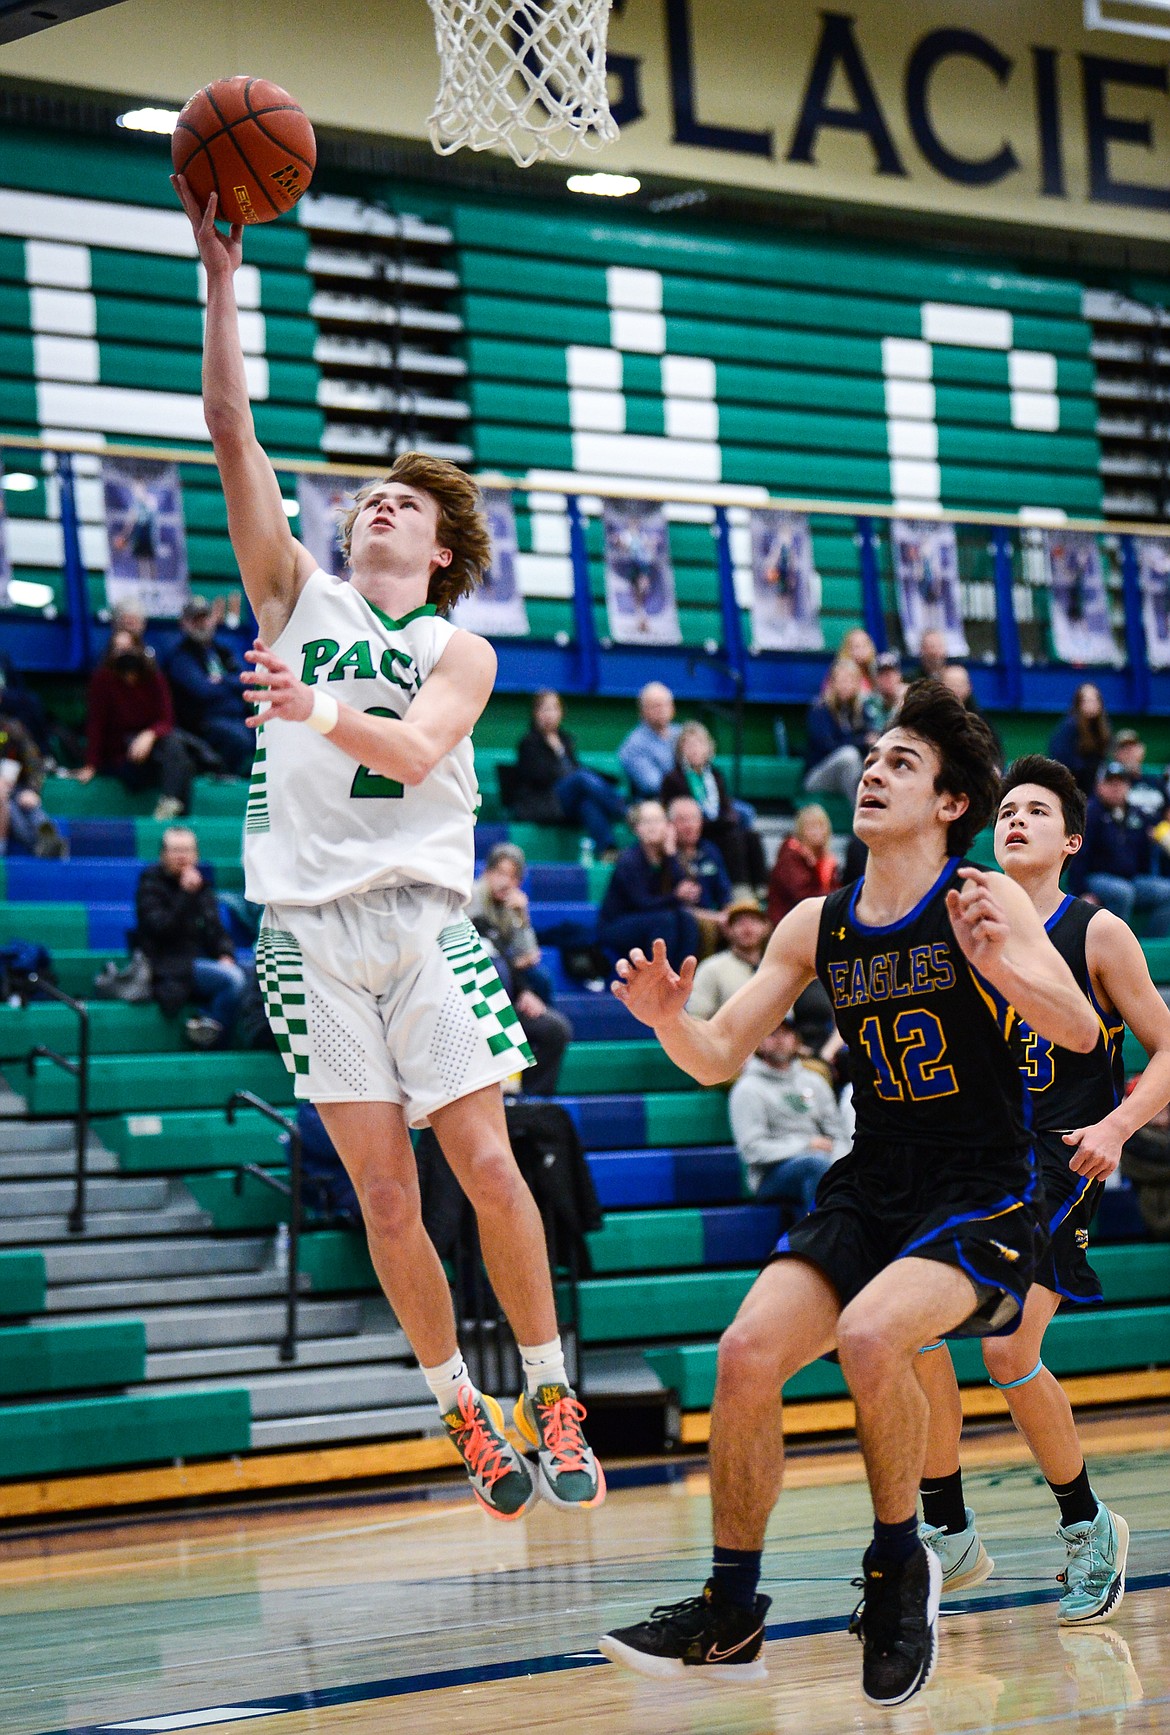 Glacier's Connor Sullivan (2) lays in two points ahead of Missoula Big Sky's Shane Shepherd (12) at Glacier High School on Tuesday, Jan. 25. (Casey Kreider/Daily Inter Lake)